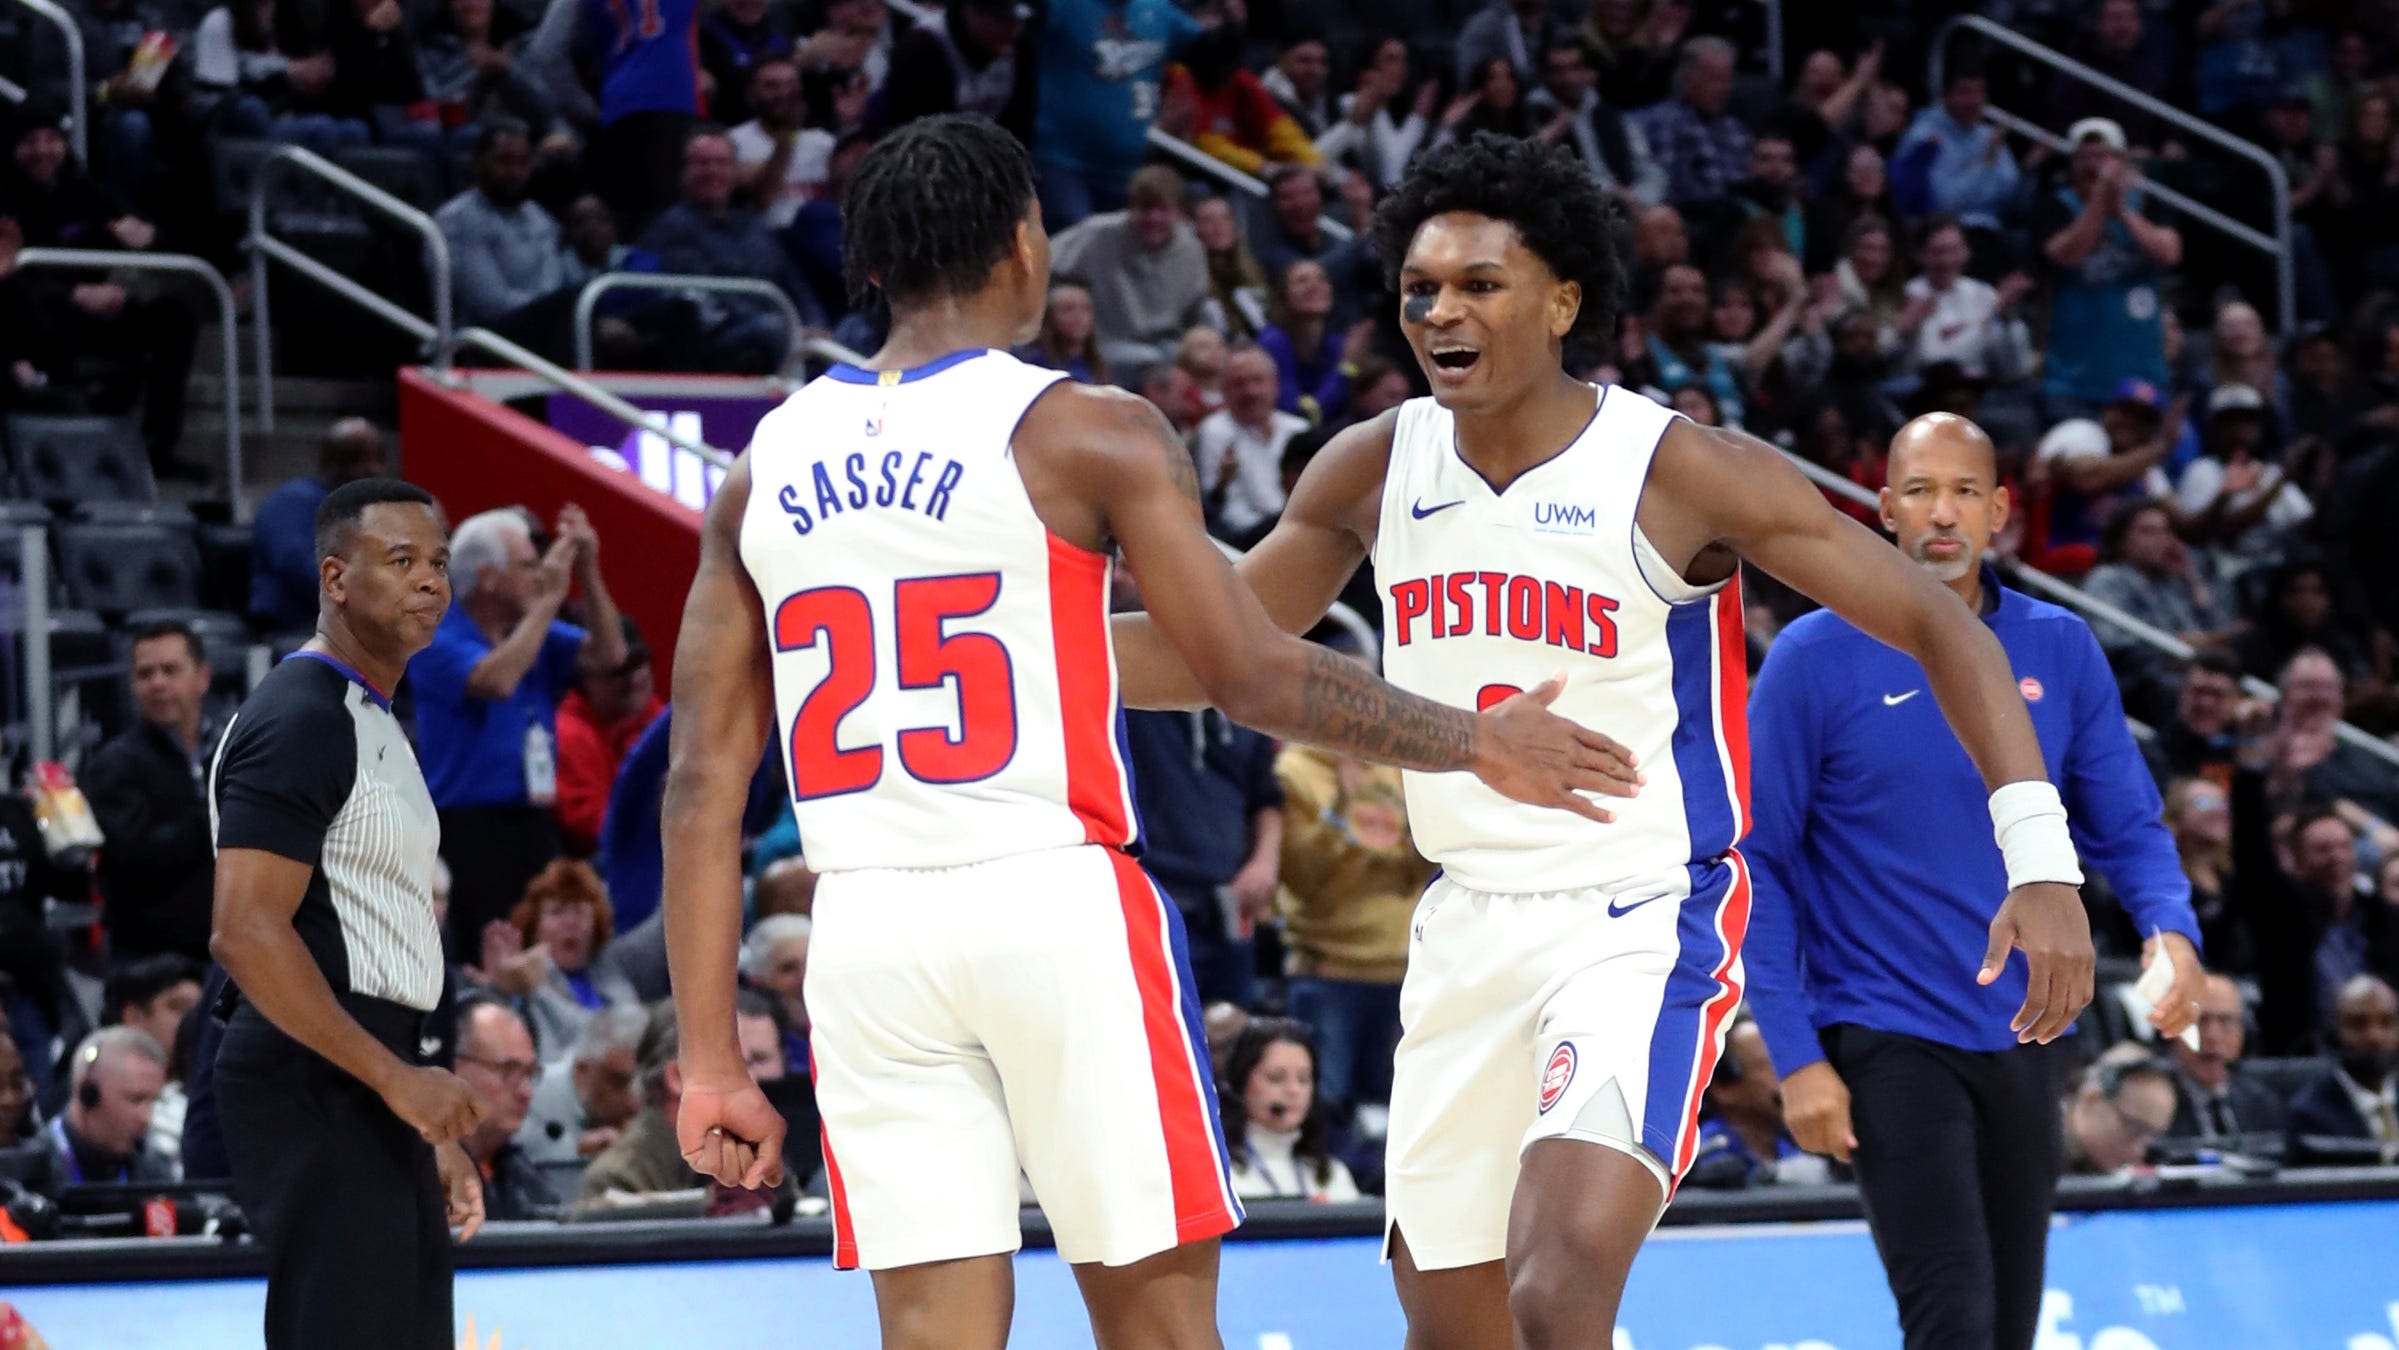 Detroit Pistons first-rounders Ausar Thompson, Marcus Sasser miss All-Rookie teams